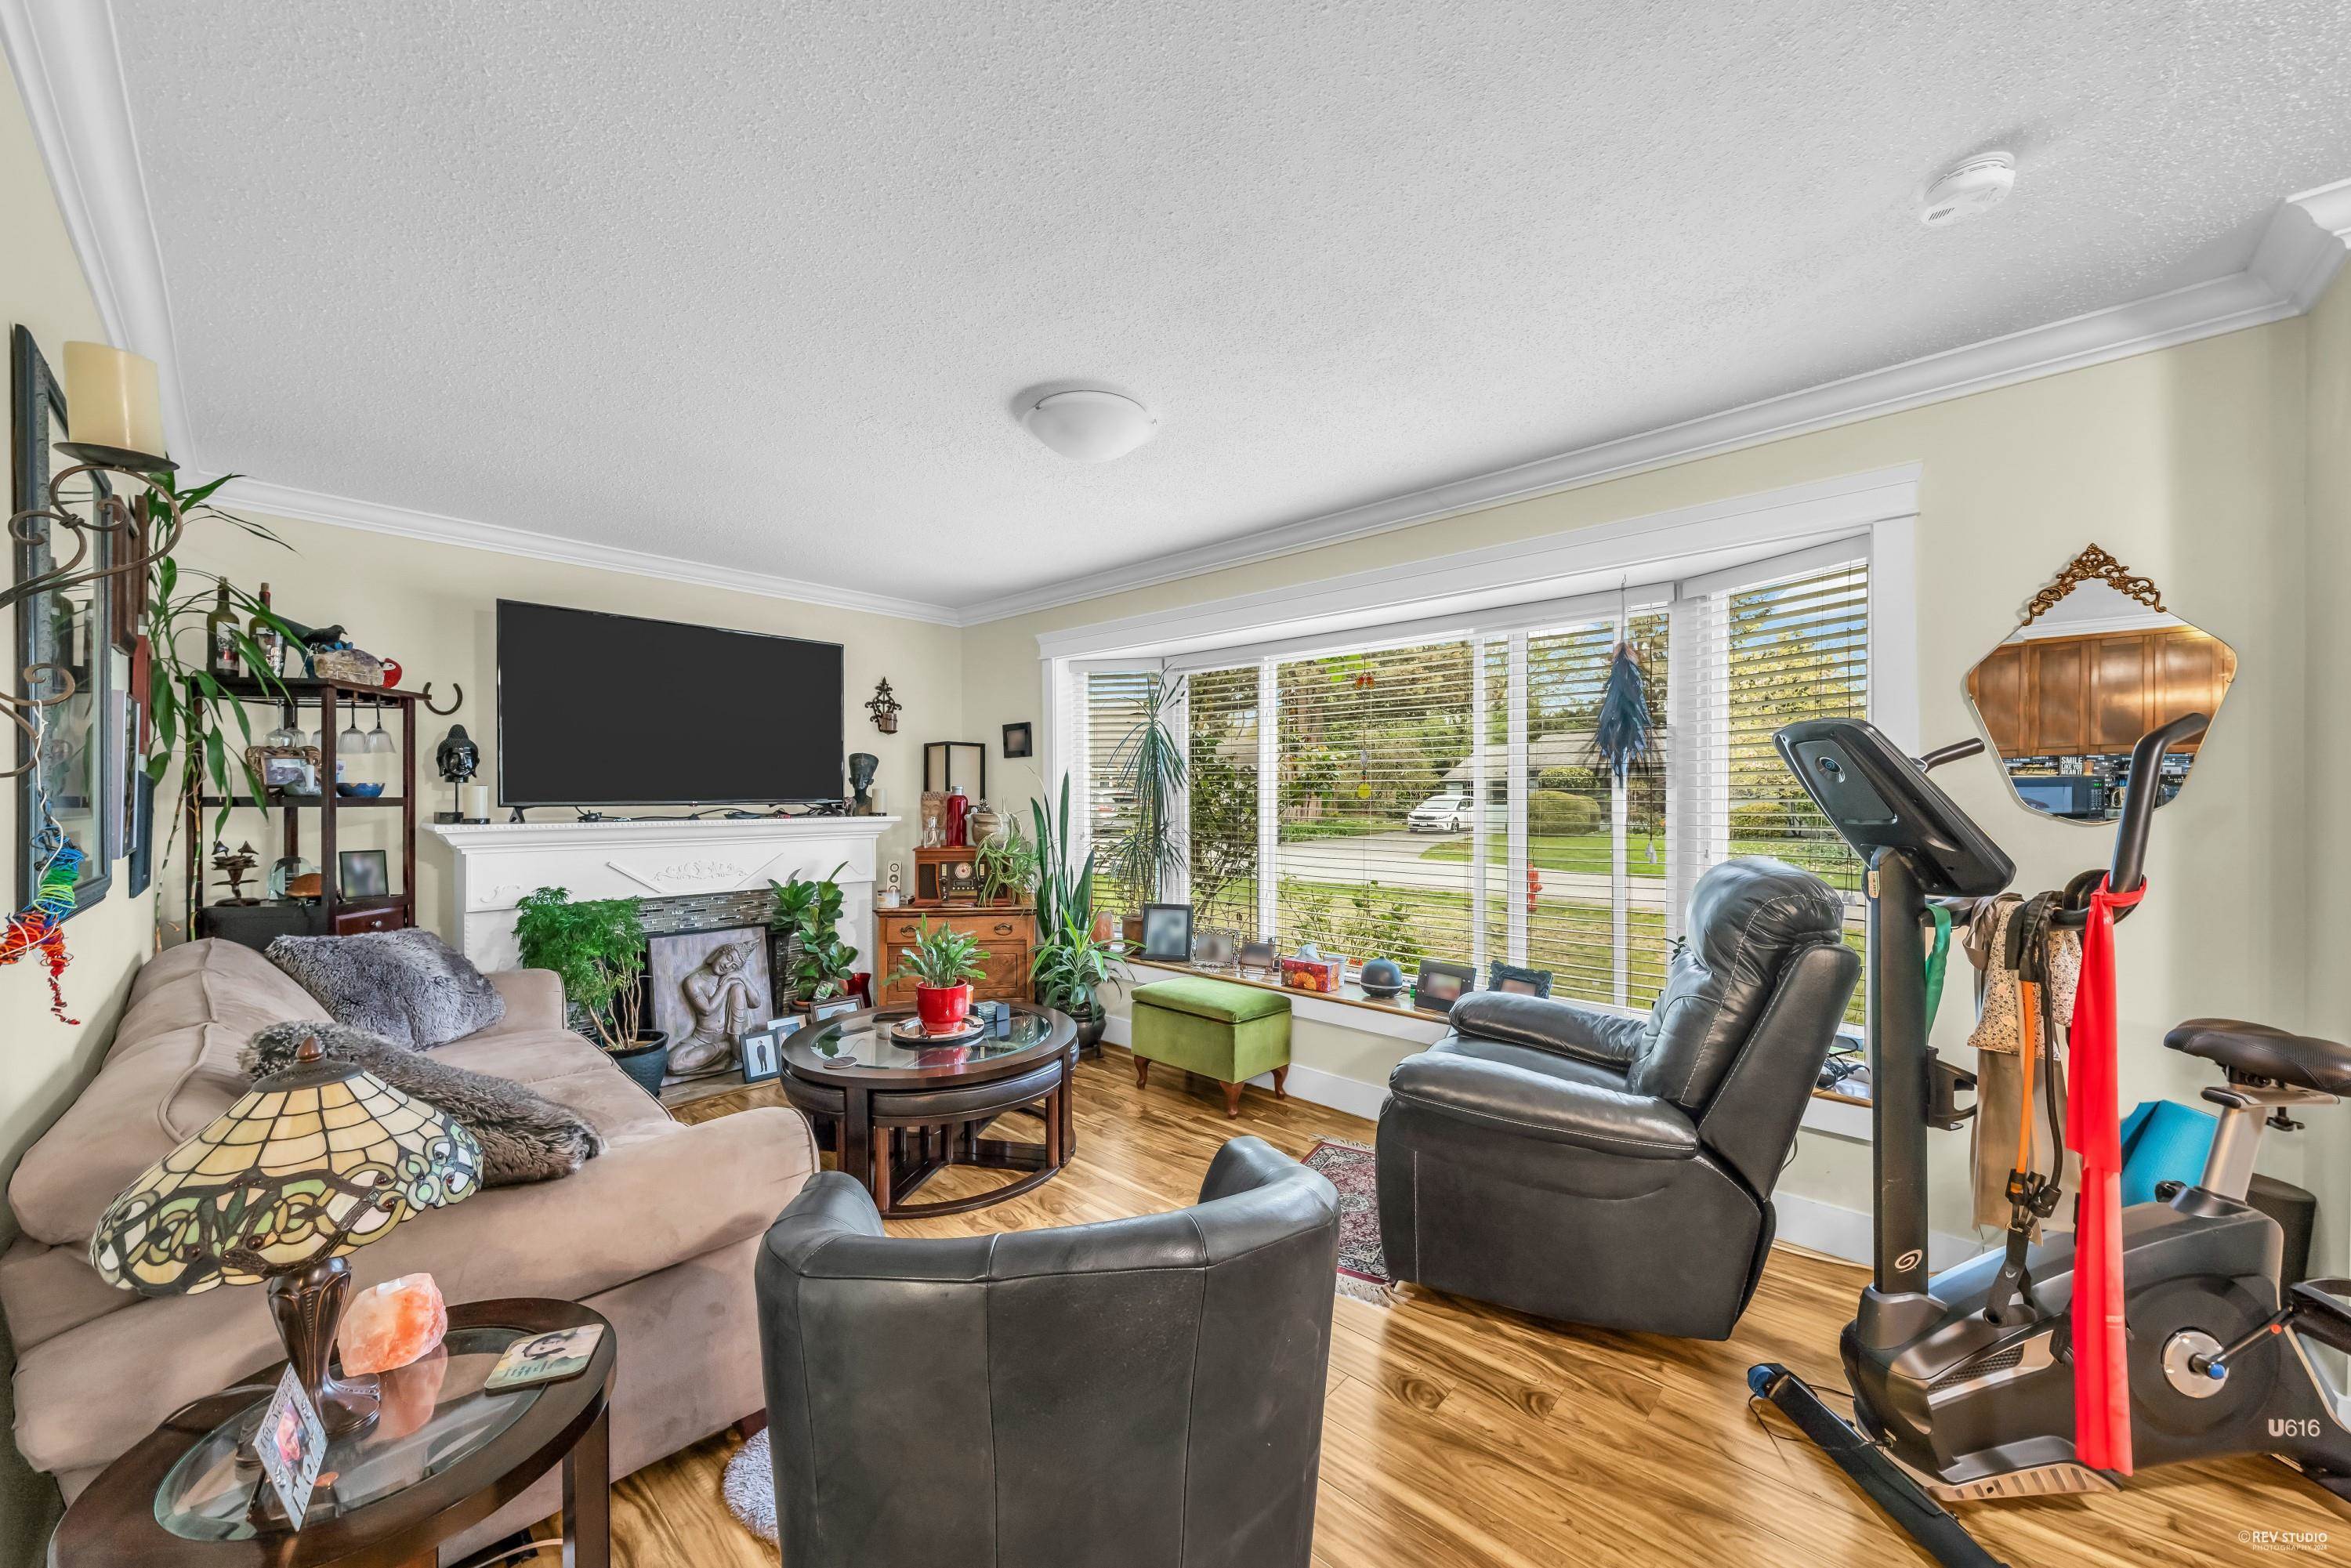 Listing image of 1219 SILVERWOOD CRESCENT